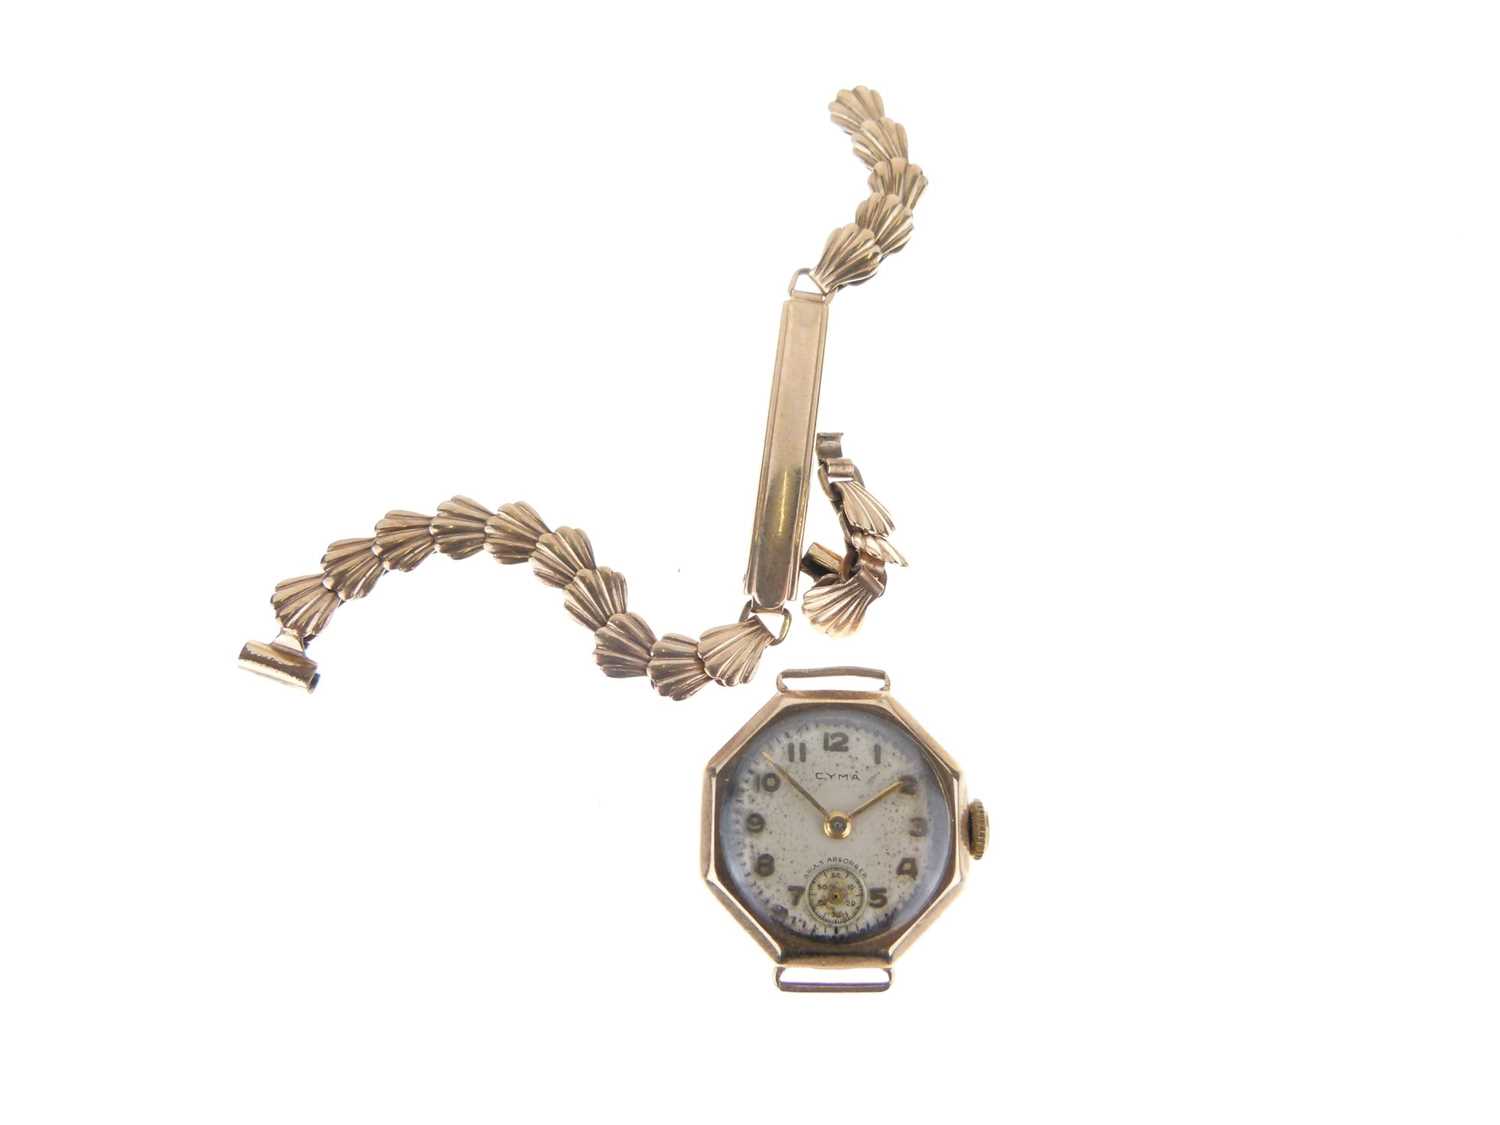 Cyma - Lady's 9ct gold cocktail watch - Image 2 of 5